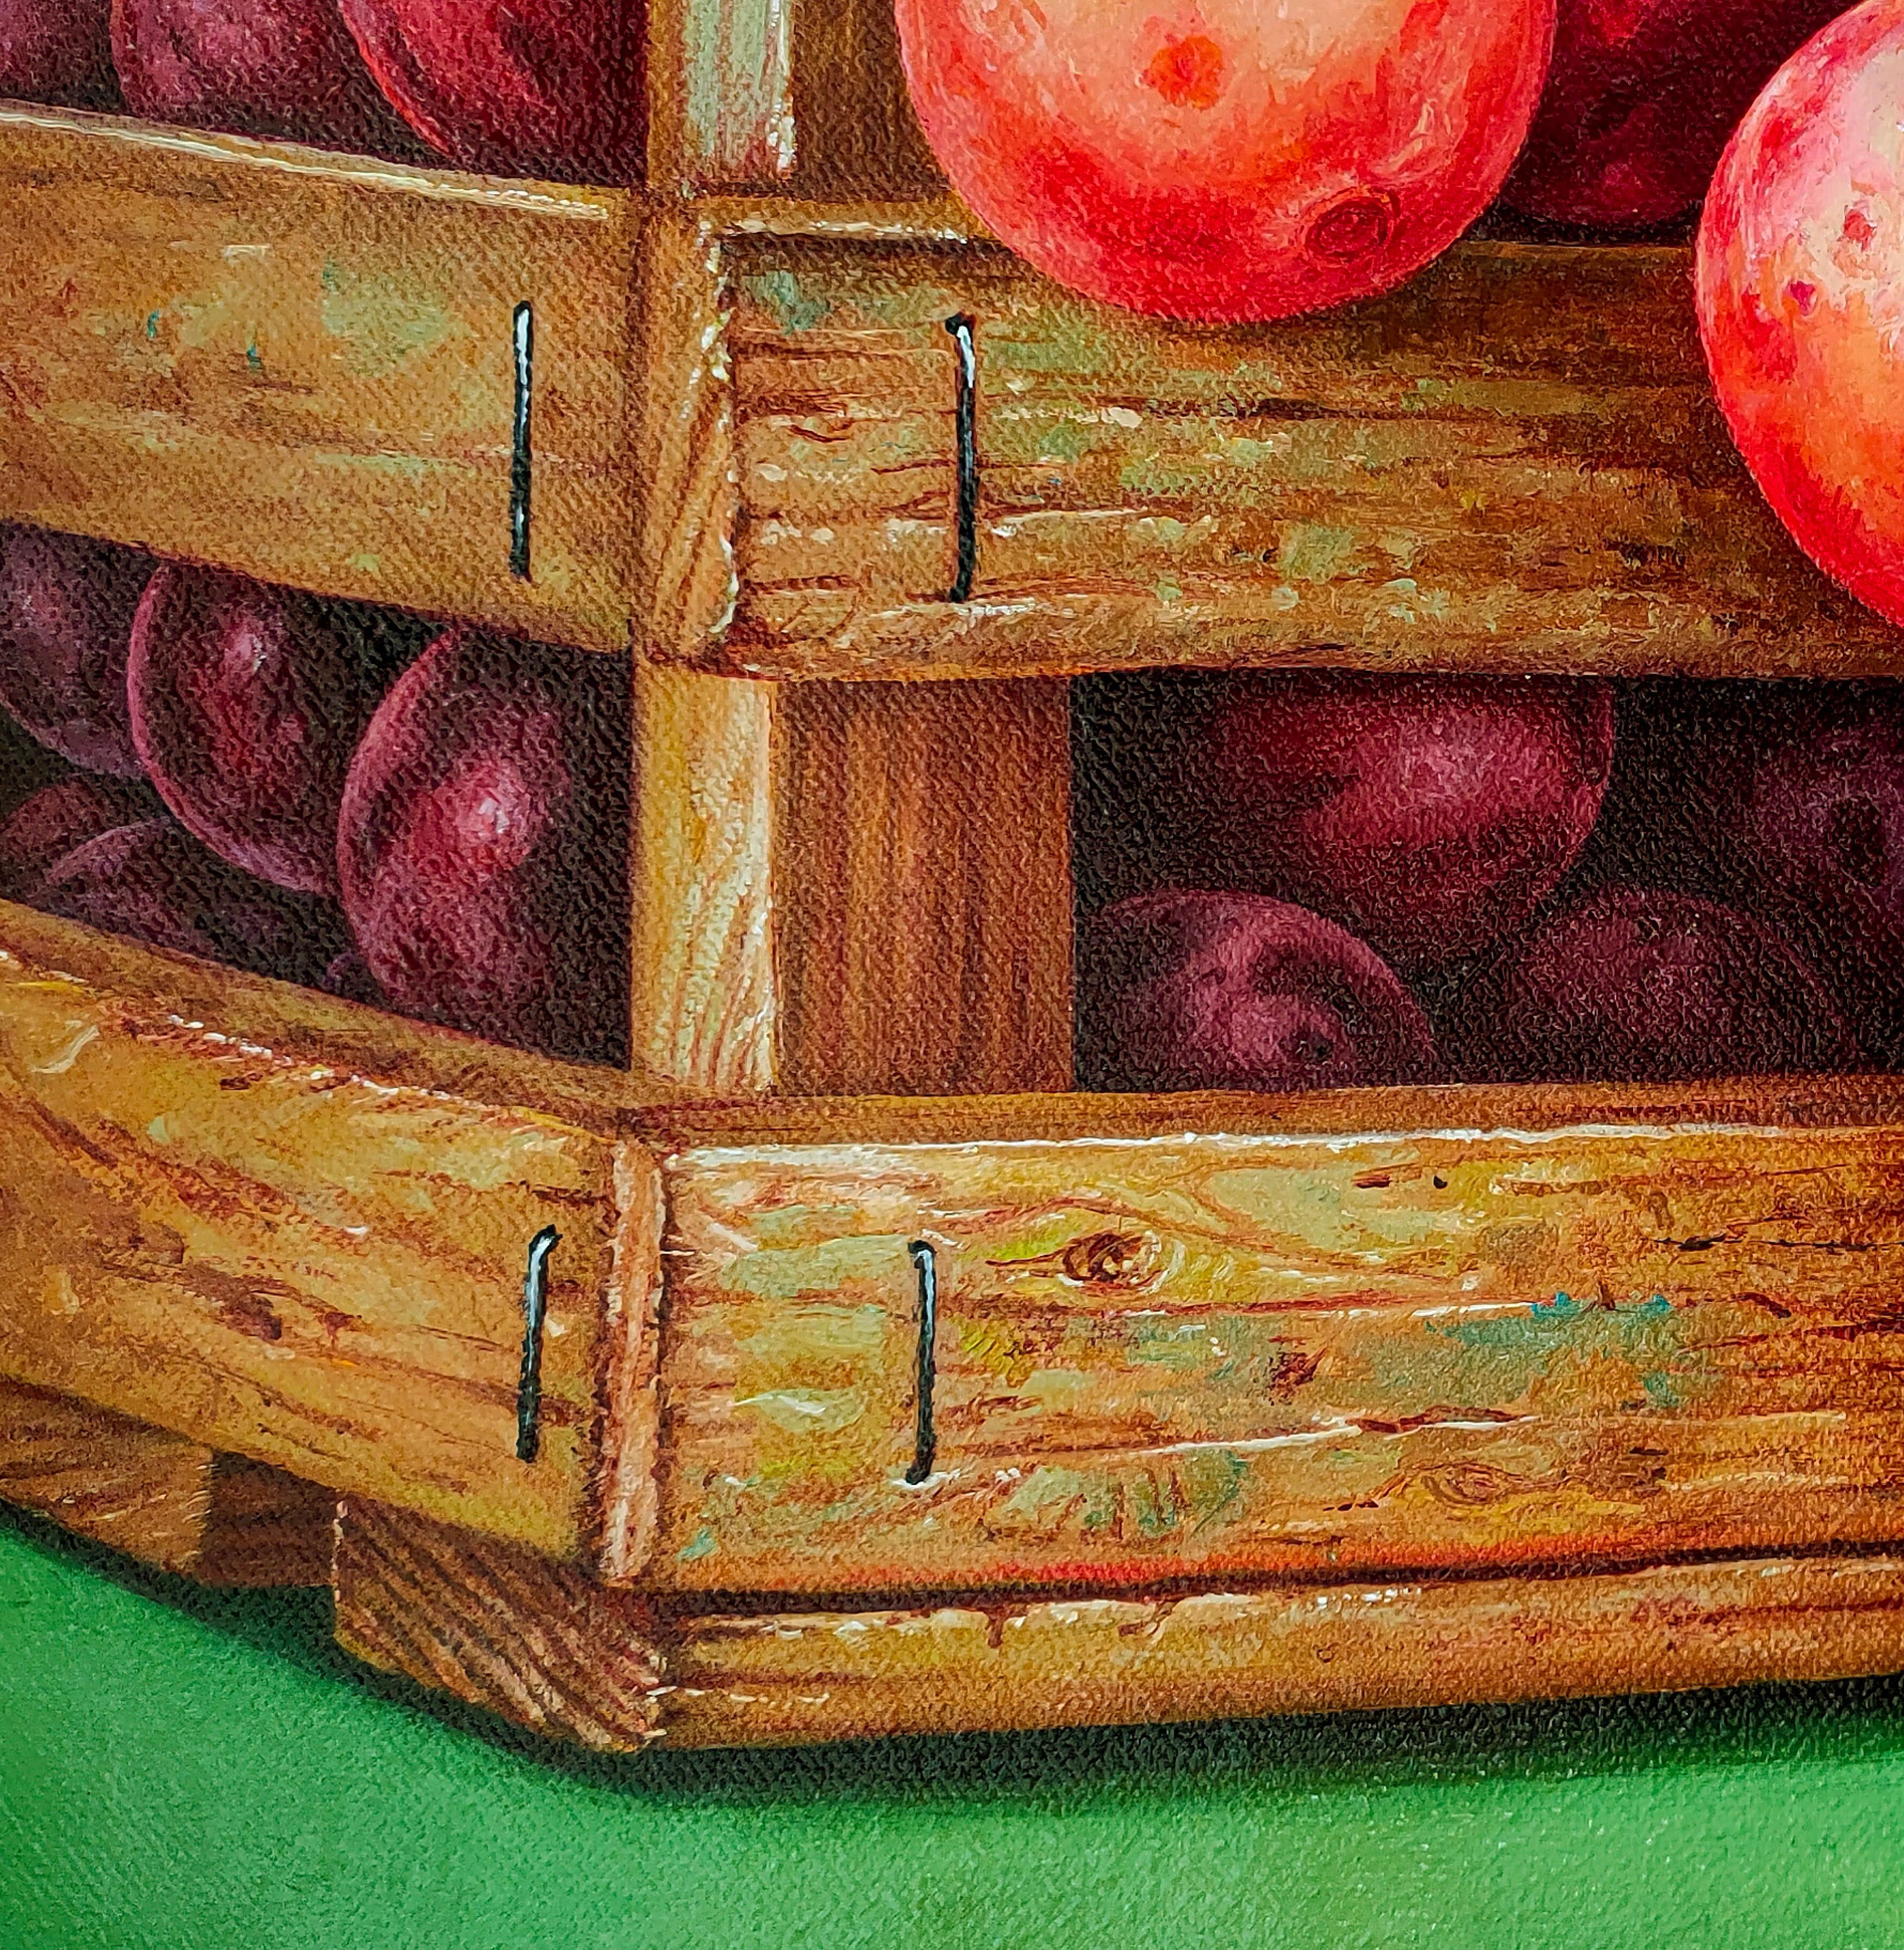 In this painting the arrangement of red grapes and red apples in a green background gives the impression that the perception of contradictions can be paired if arranged well.
